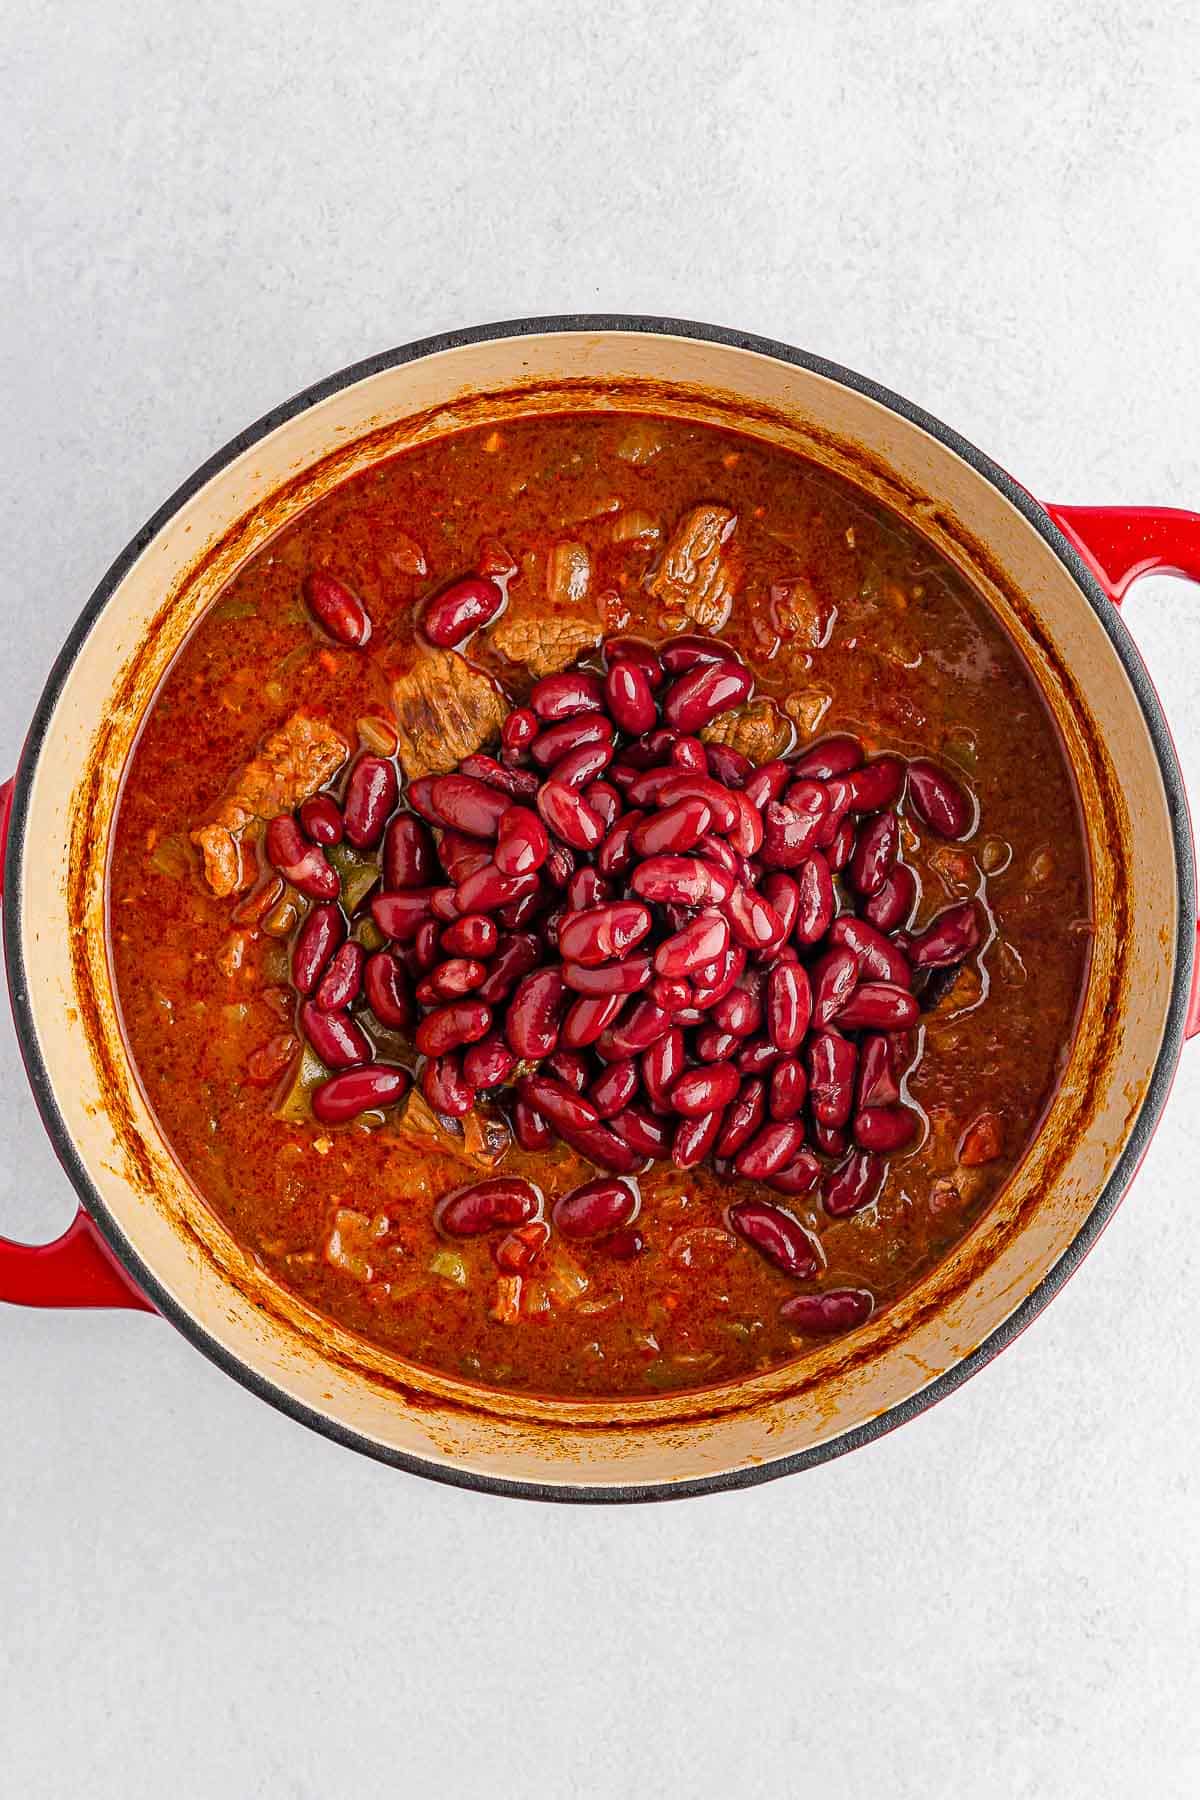 Chili beans in a red pot on a white background.